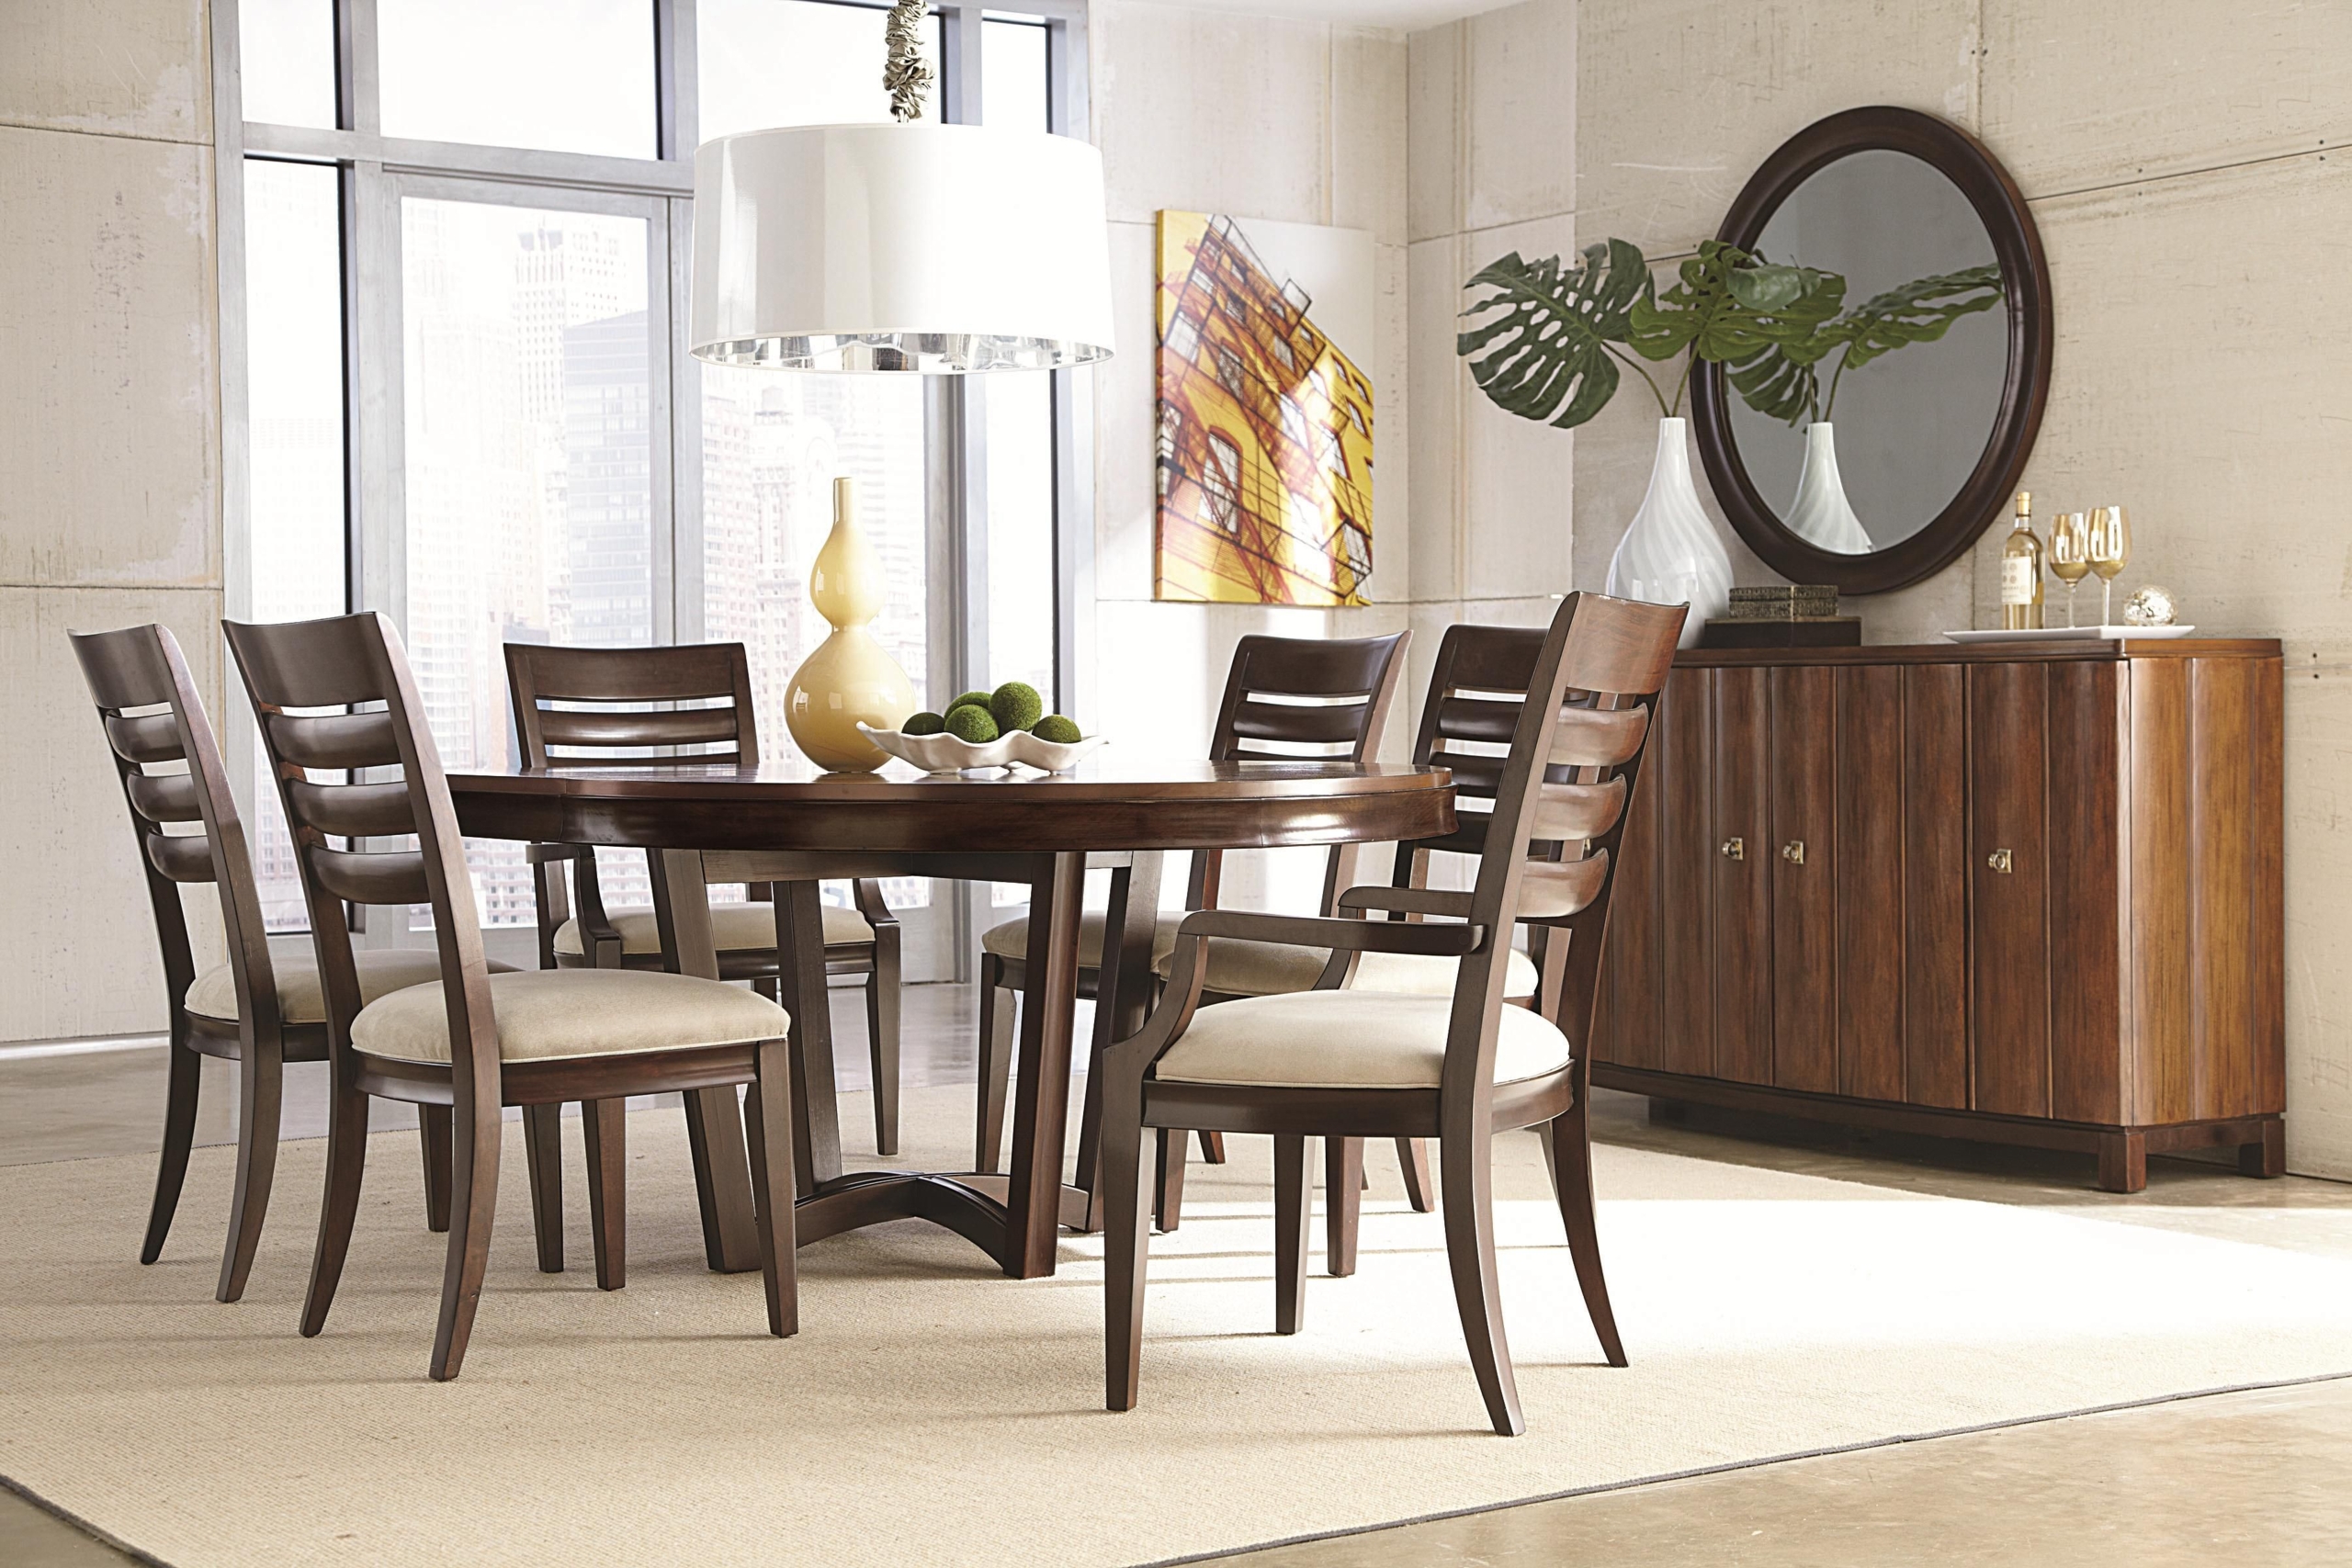 Round Dining Table For 6 Visualhunt, Modern Round Wood Dining Room Tables